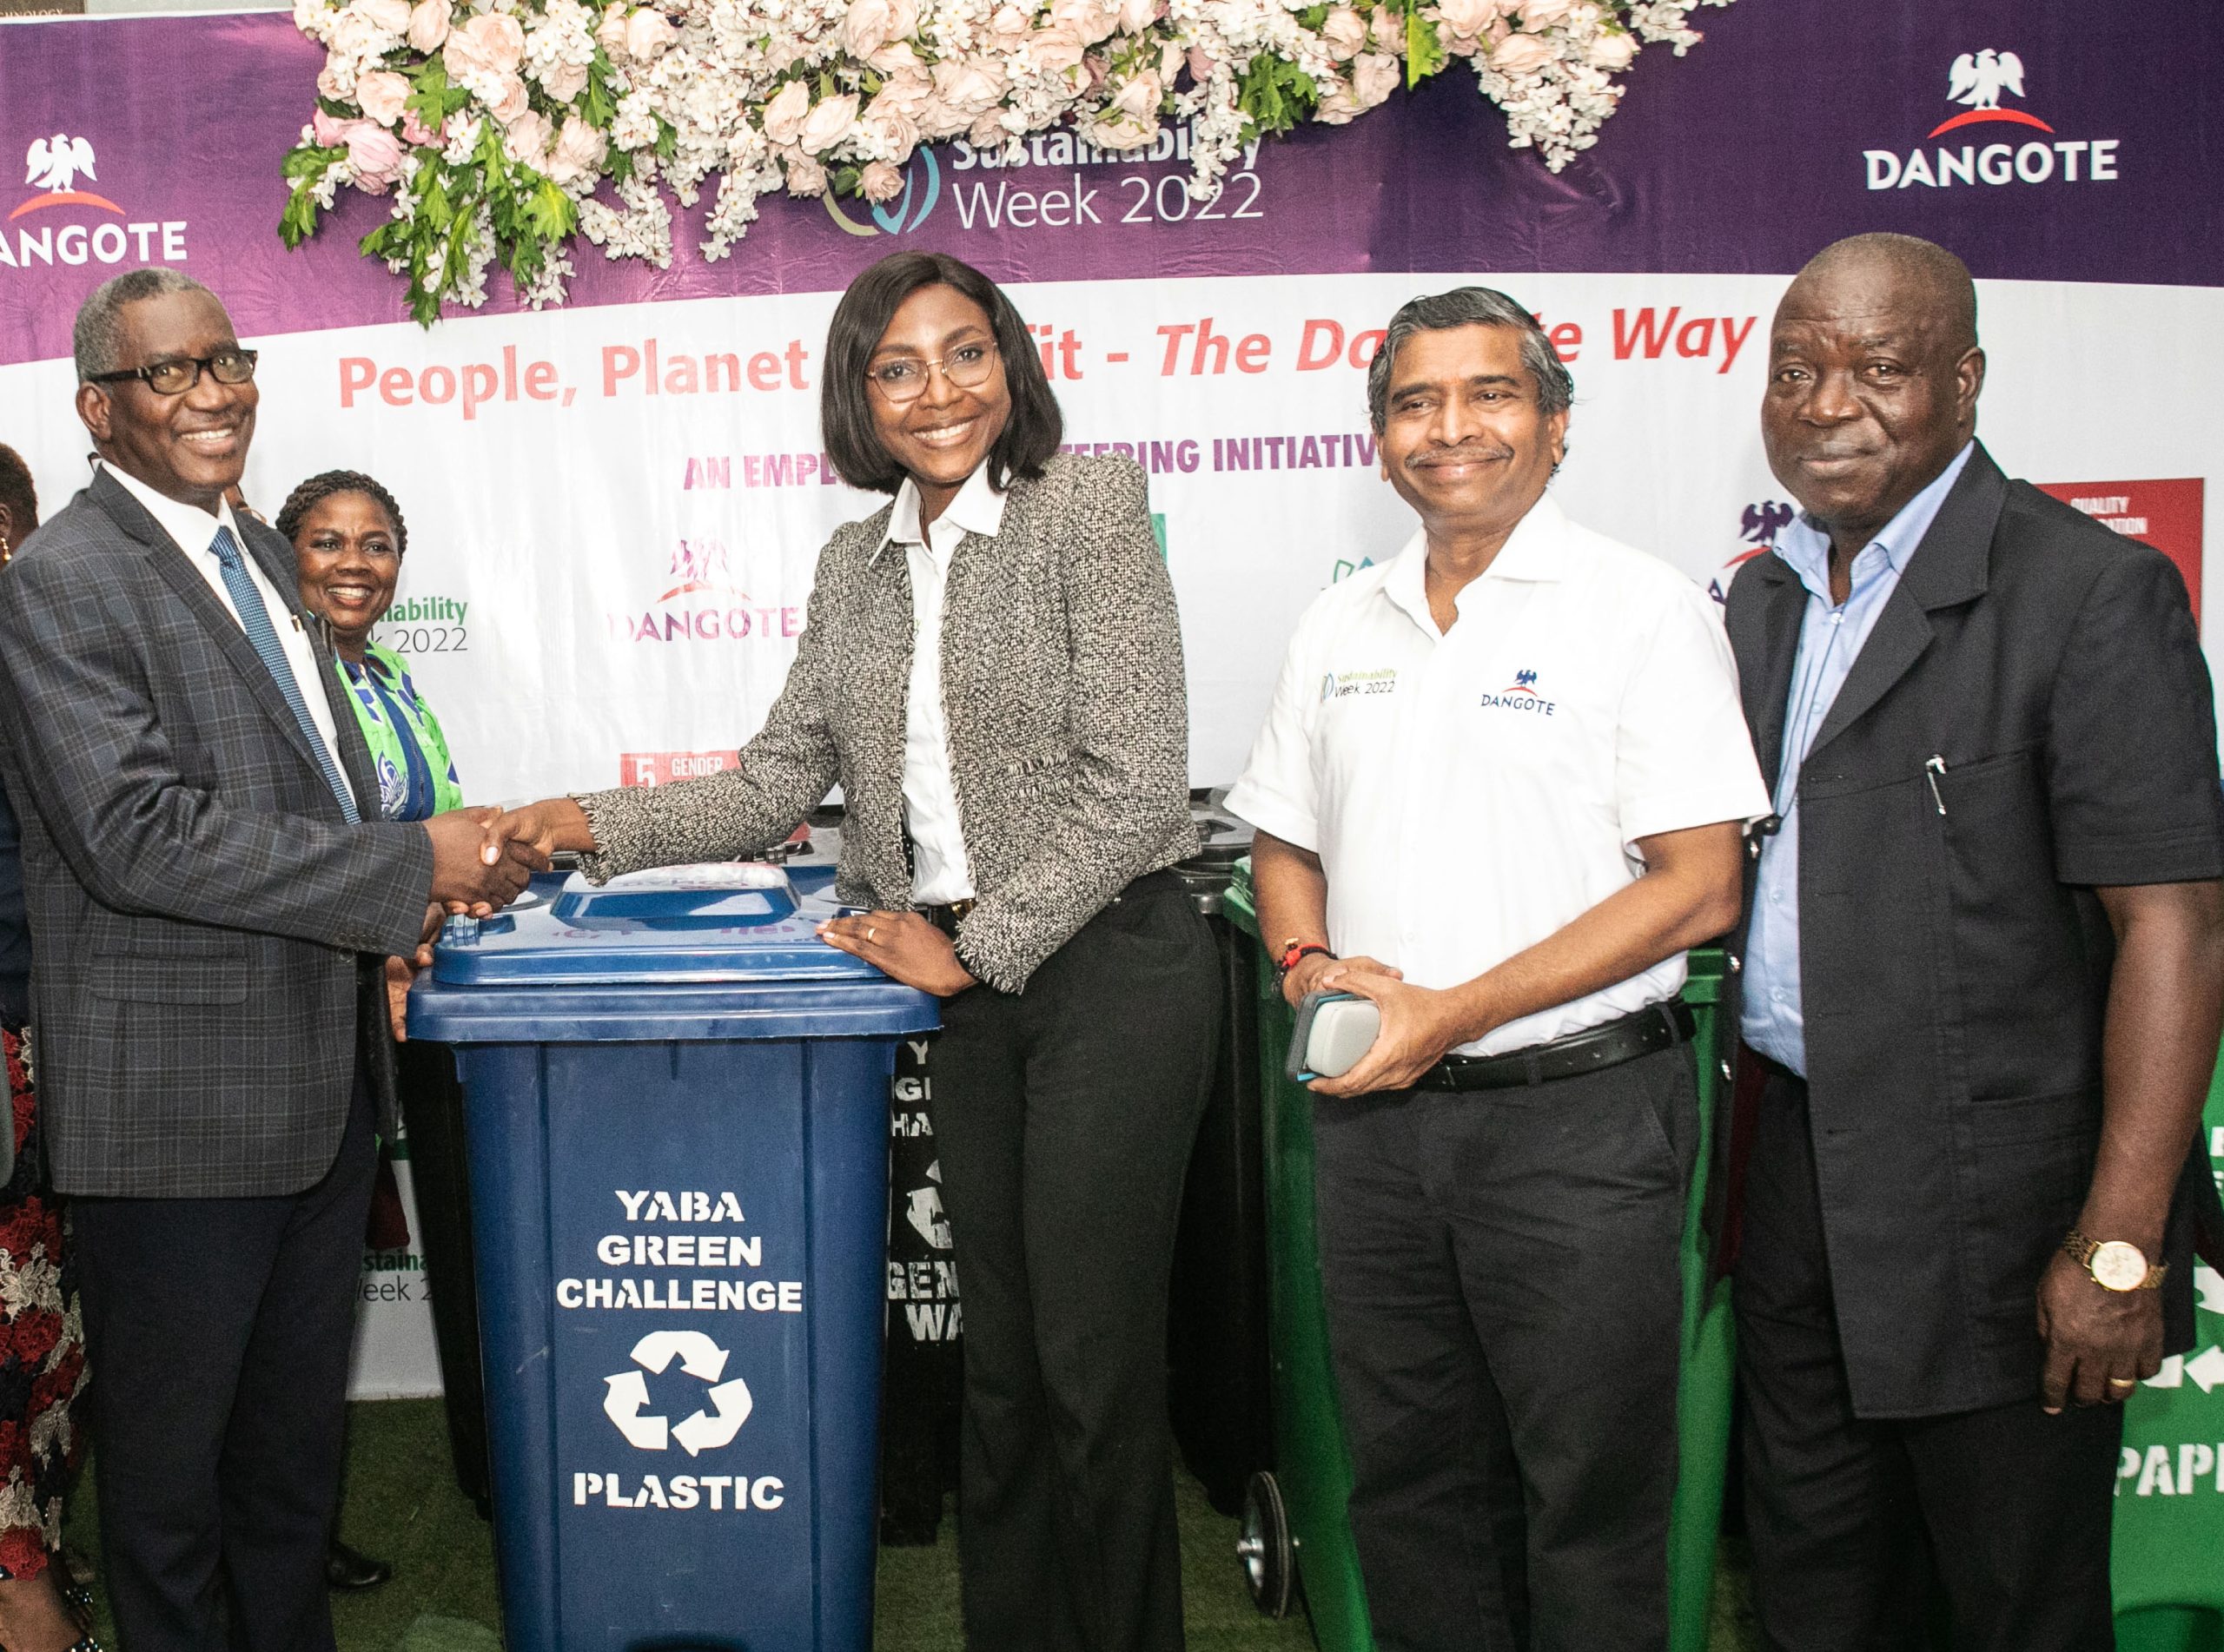 Dangote launches circular economy programme, trains traders on financial literacy